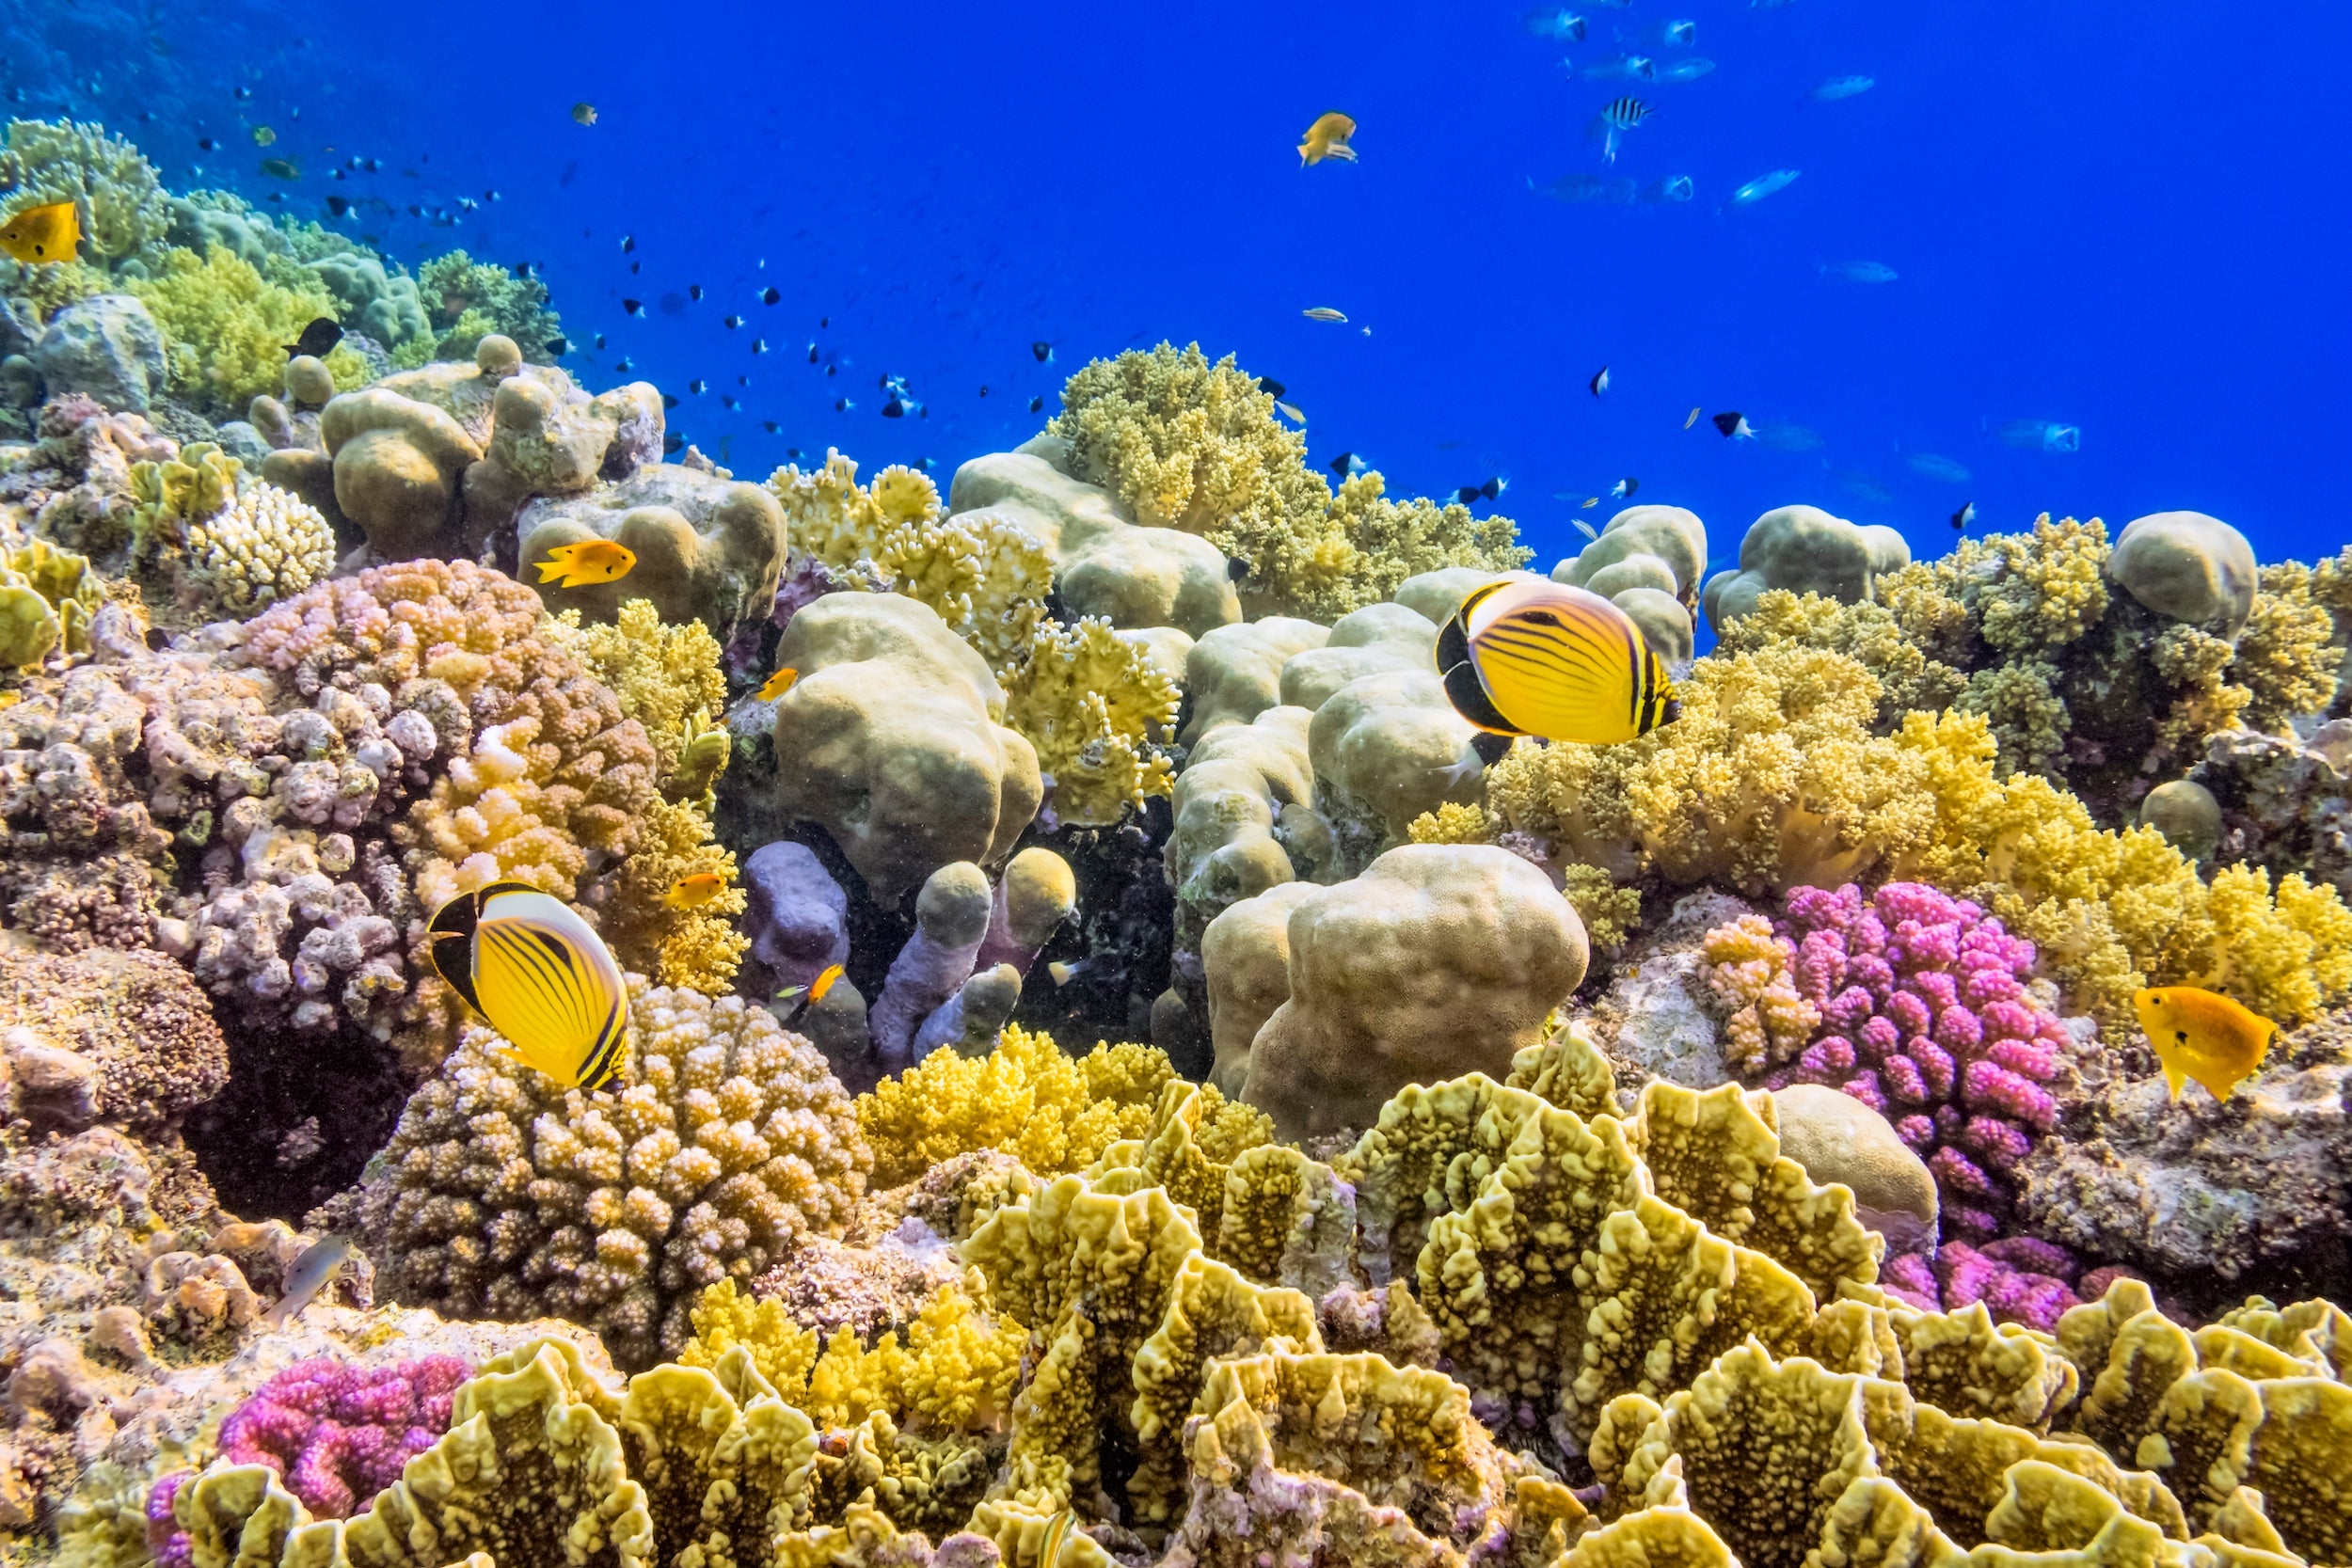 Reasons why should we protect corals